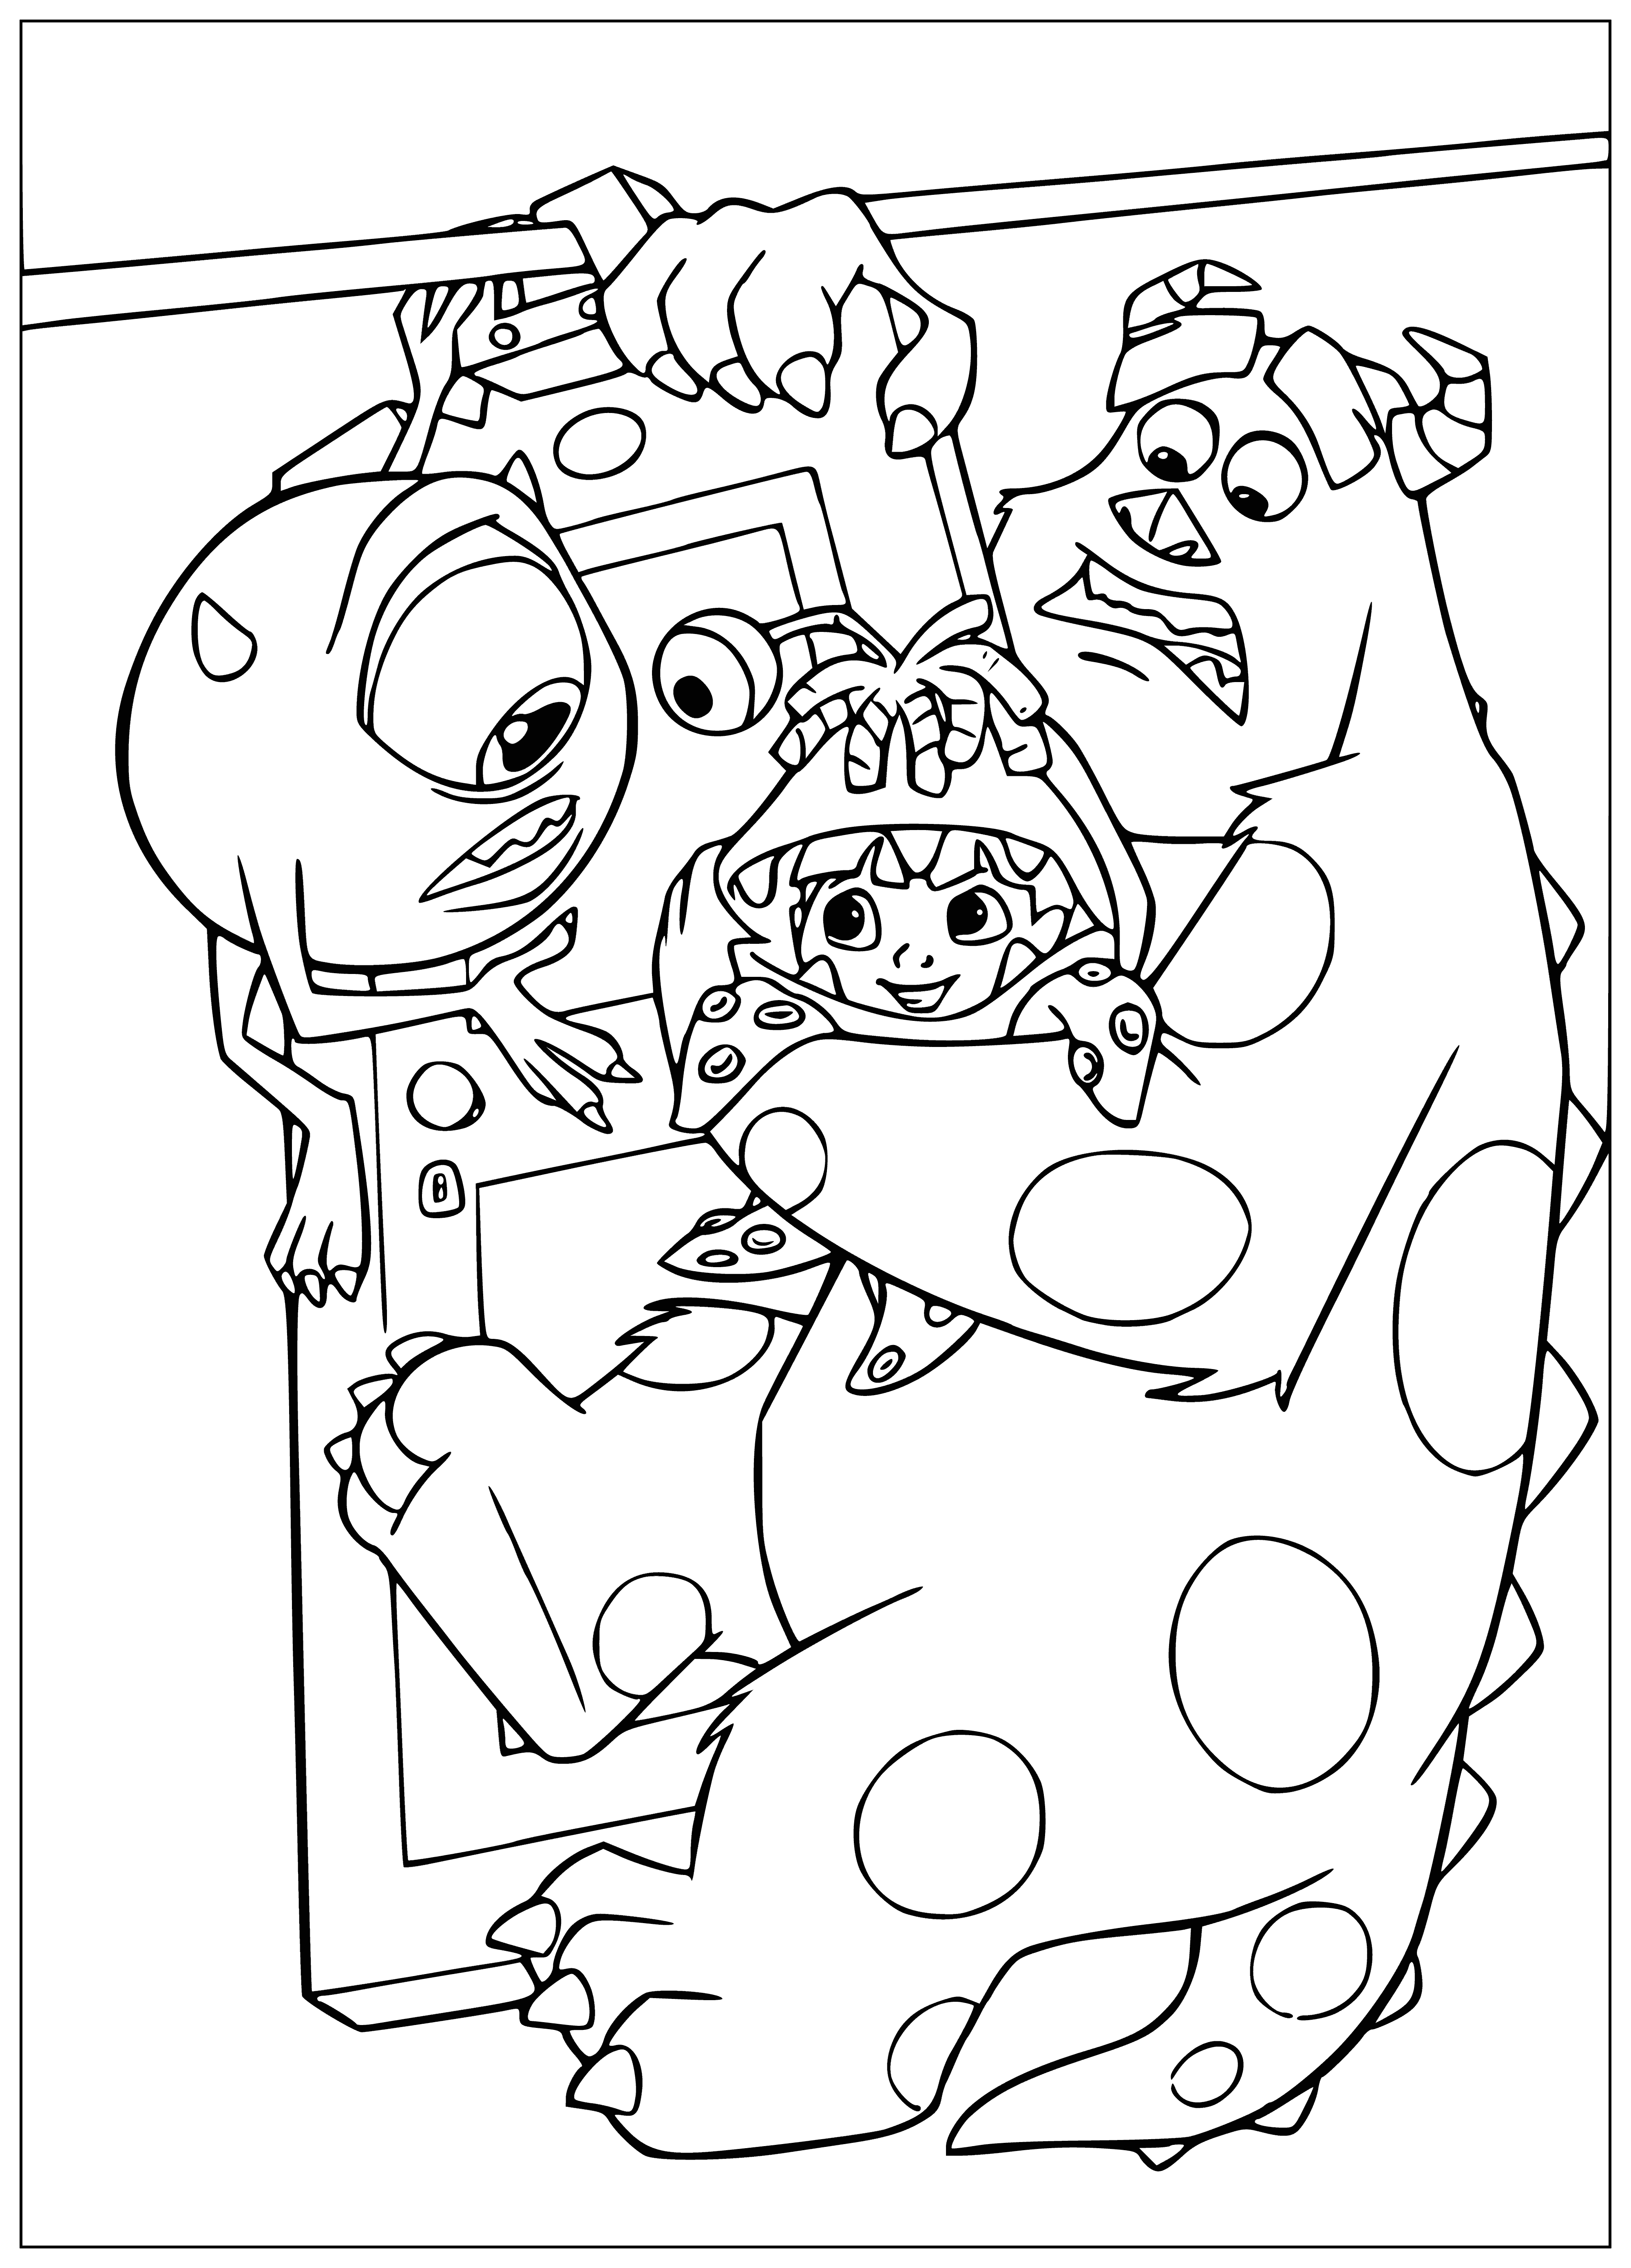 Riding on the door coloring page